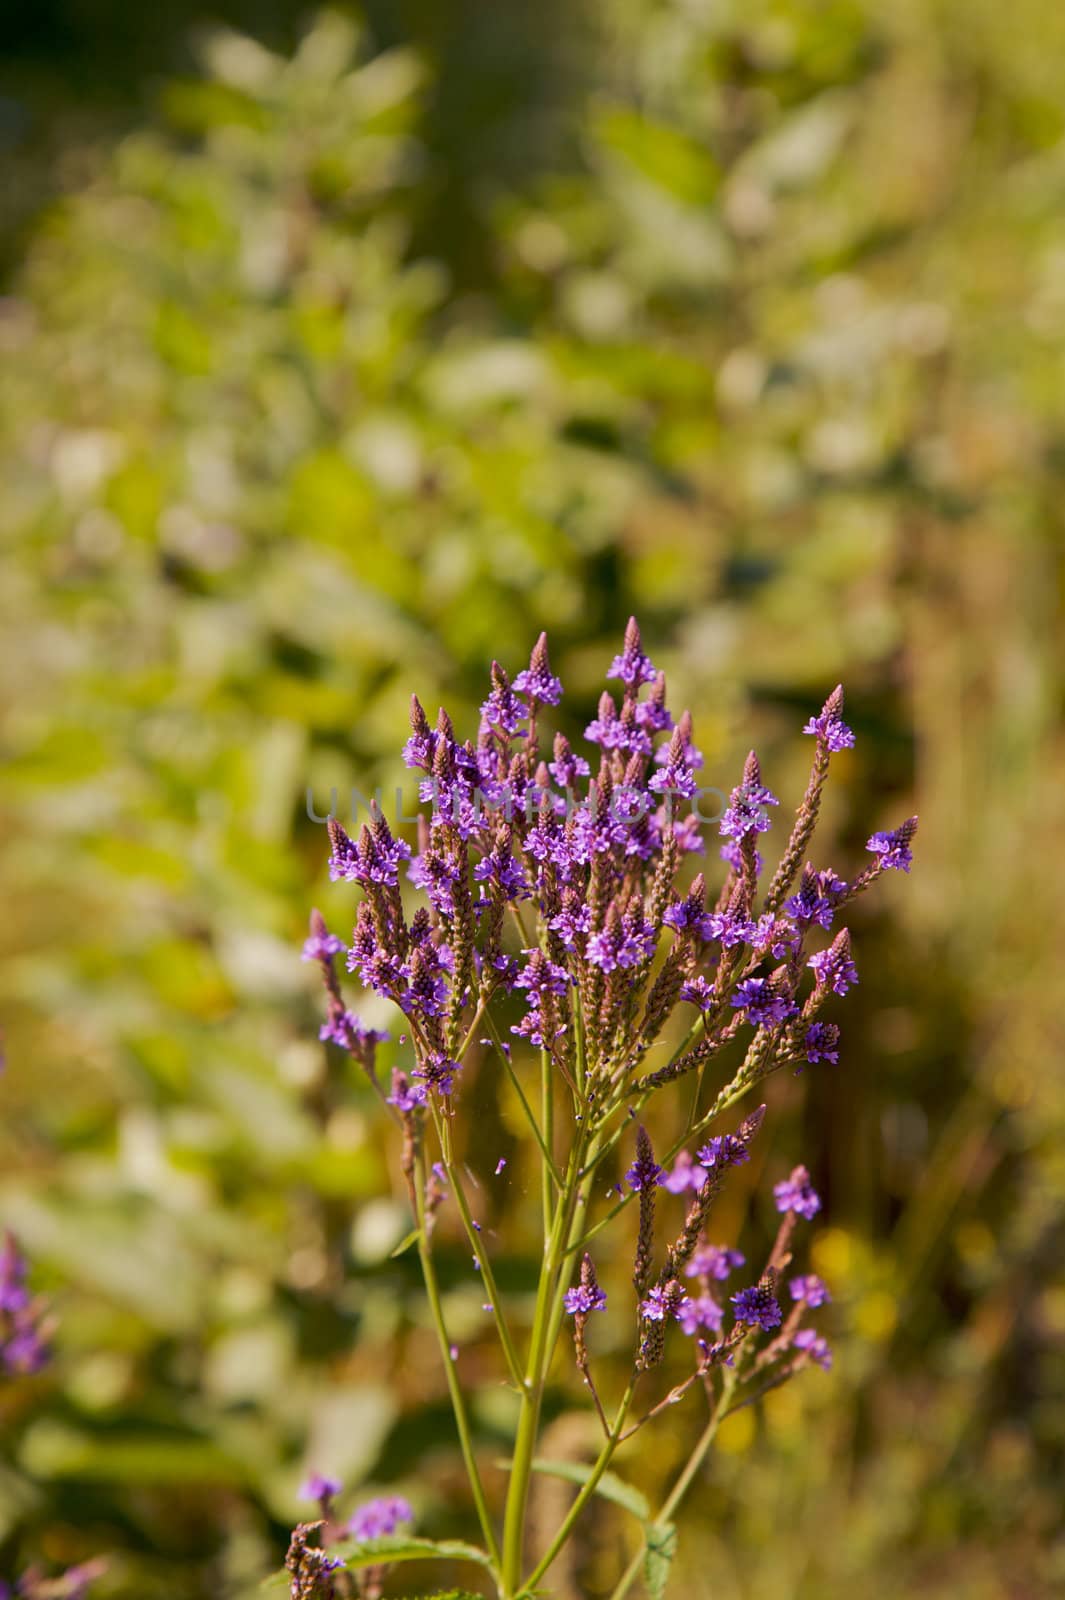 Small wild purple flowers against a bright green soft focus background